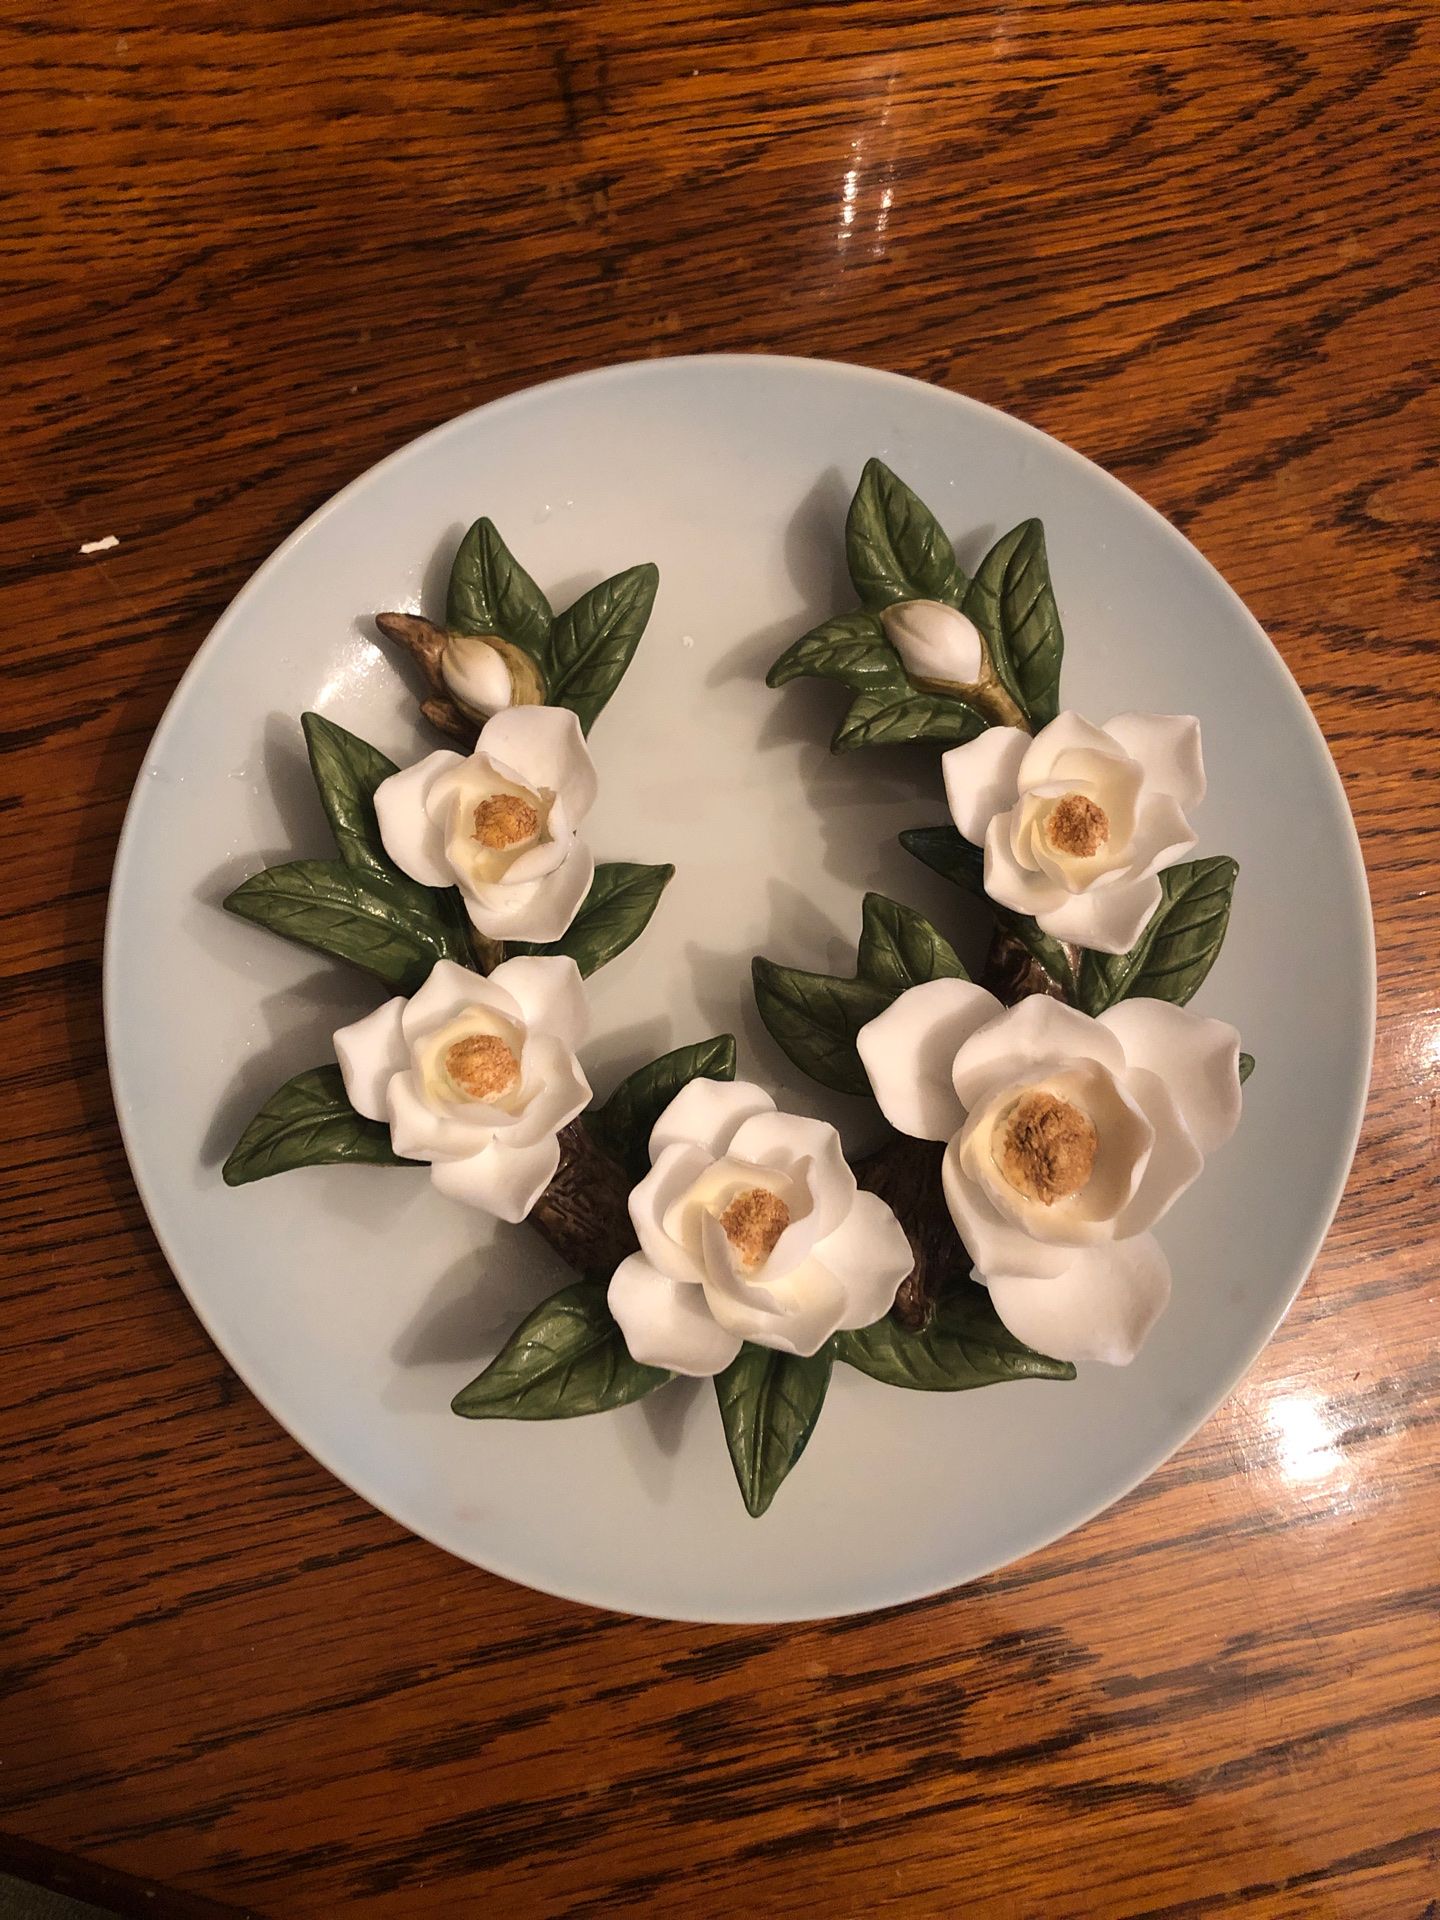 Plate of magnolias, connoisseur collection by Mario Bernini limited edition made in China circa 1996